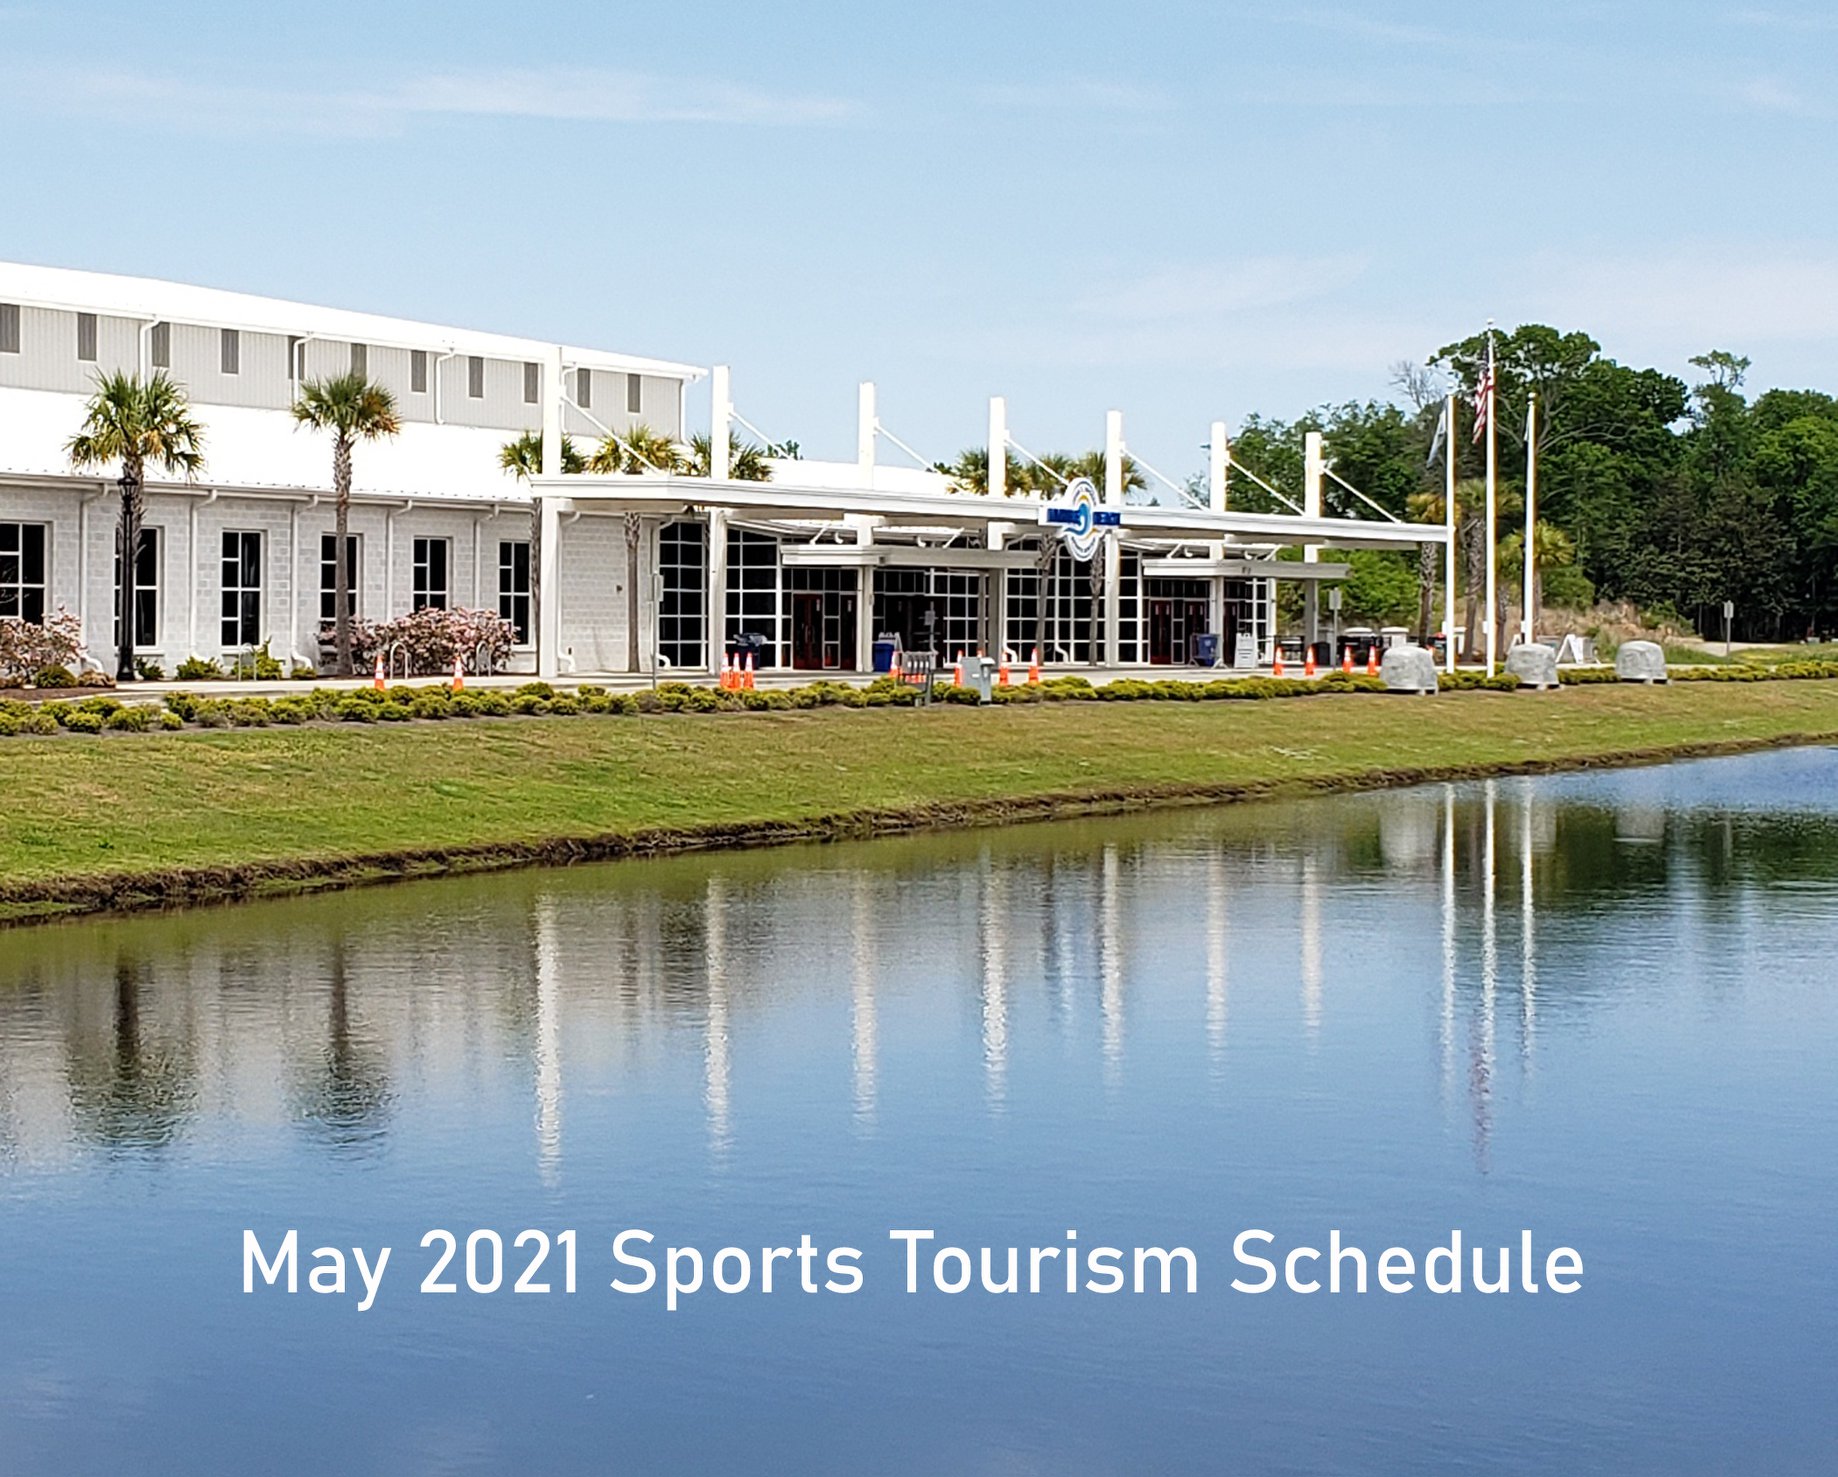 May 2021 Sports Tourism Schedule